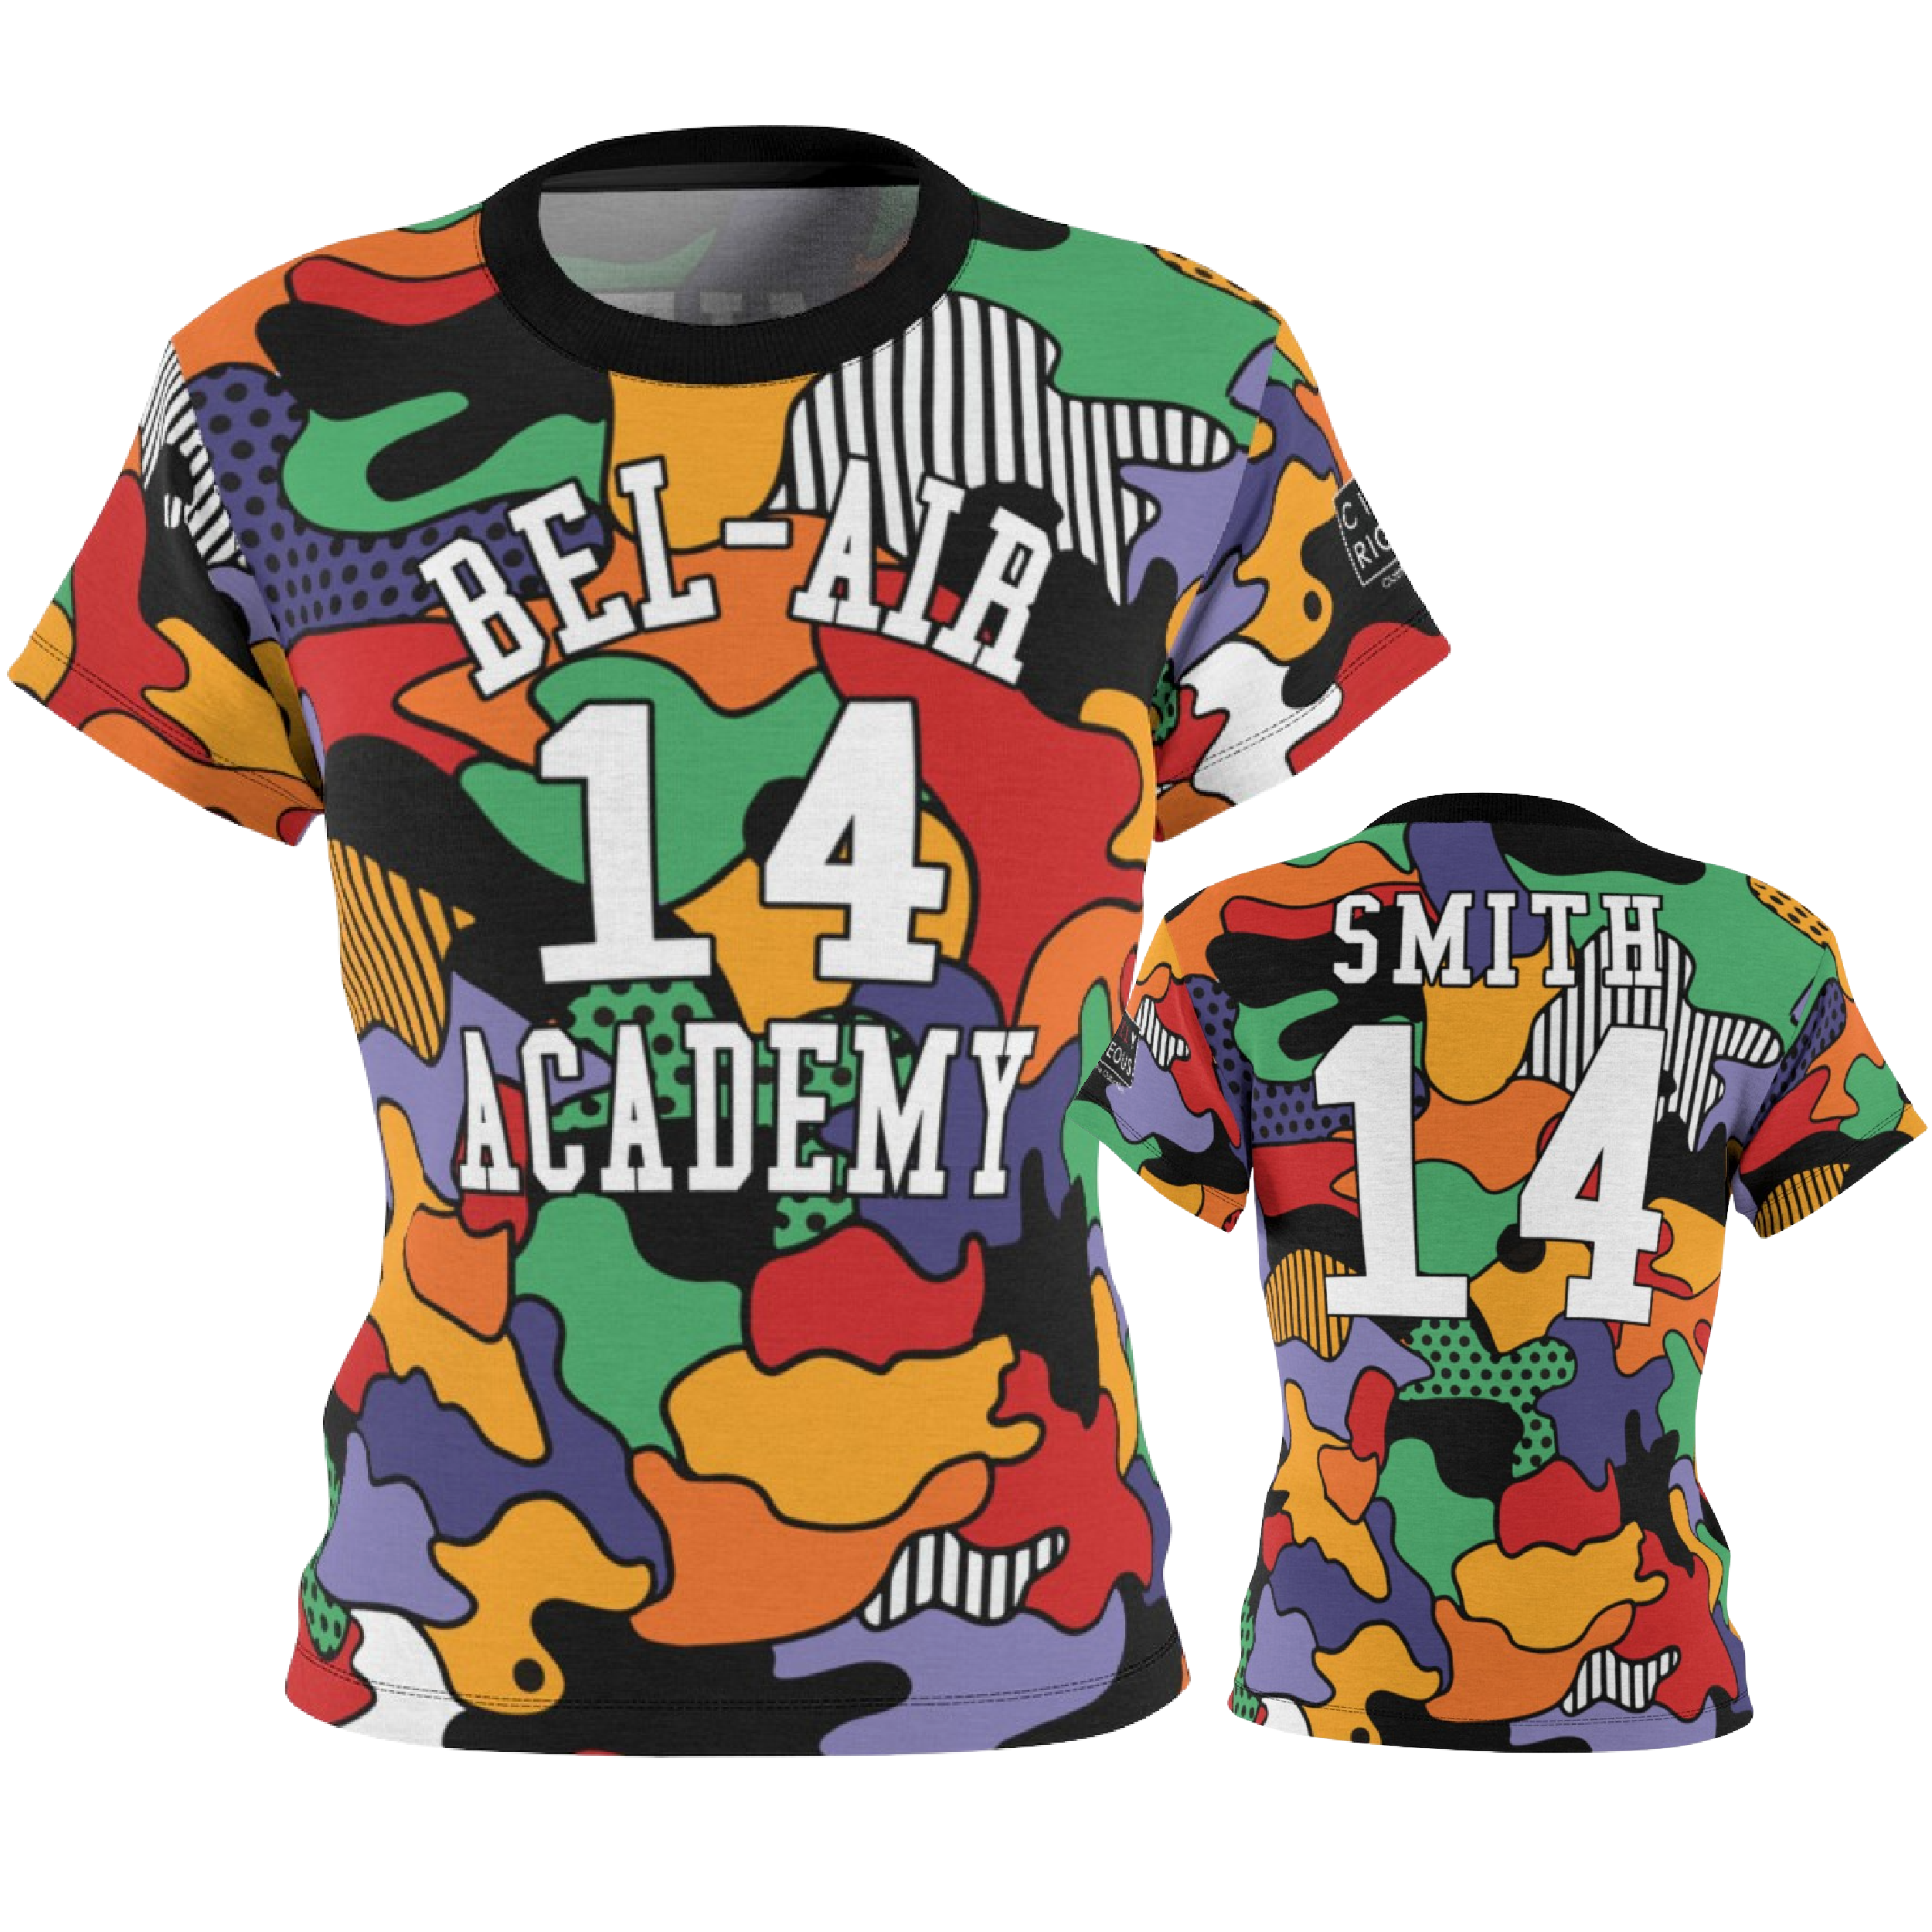 Civilly Righteous Clothing Bel-Air Academy, Will Smith - Fresh Prince 90's Basketball - Jersey S / Black Seams / 6 oz.